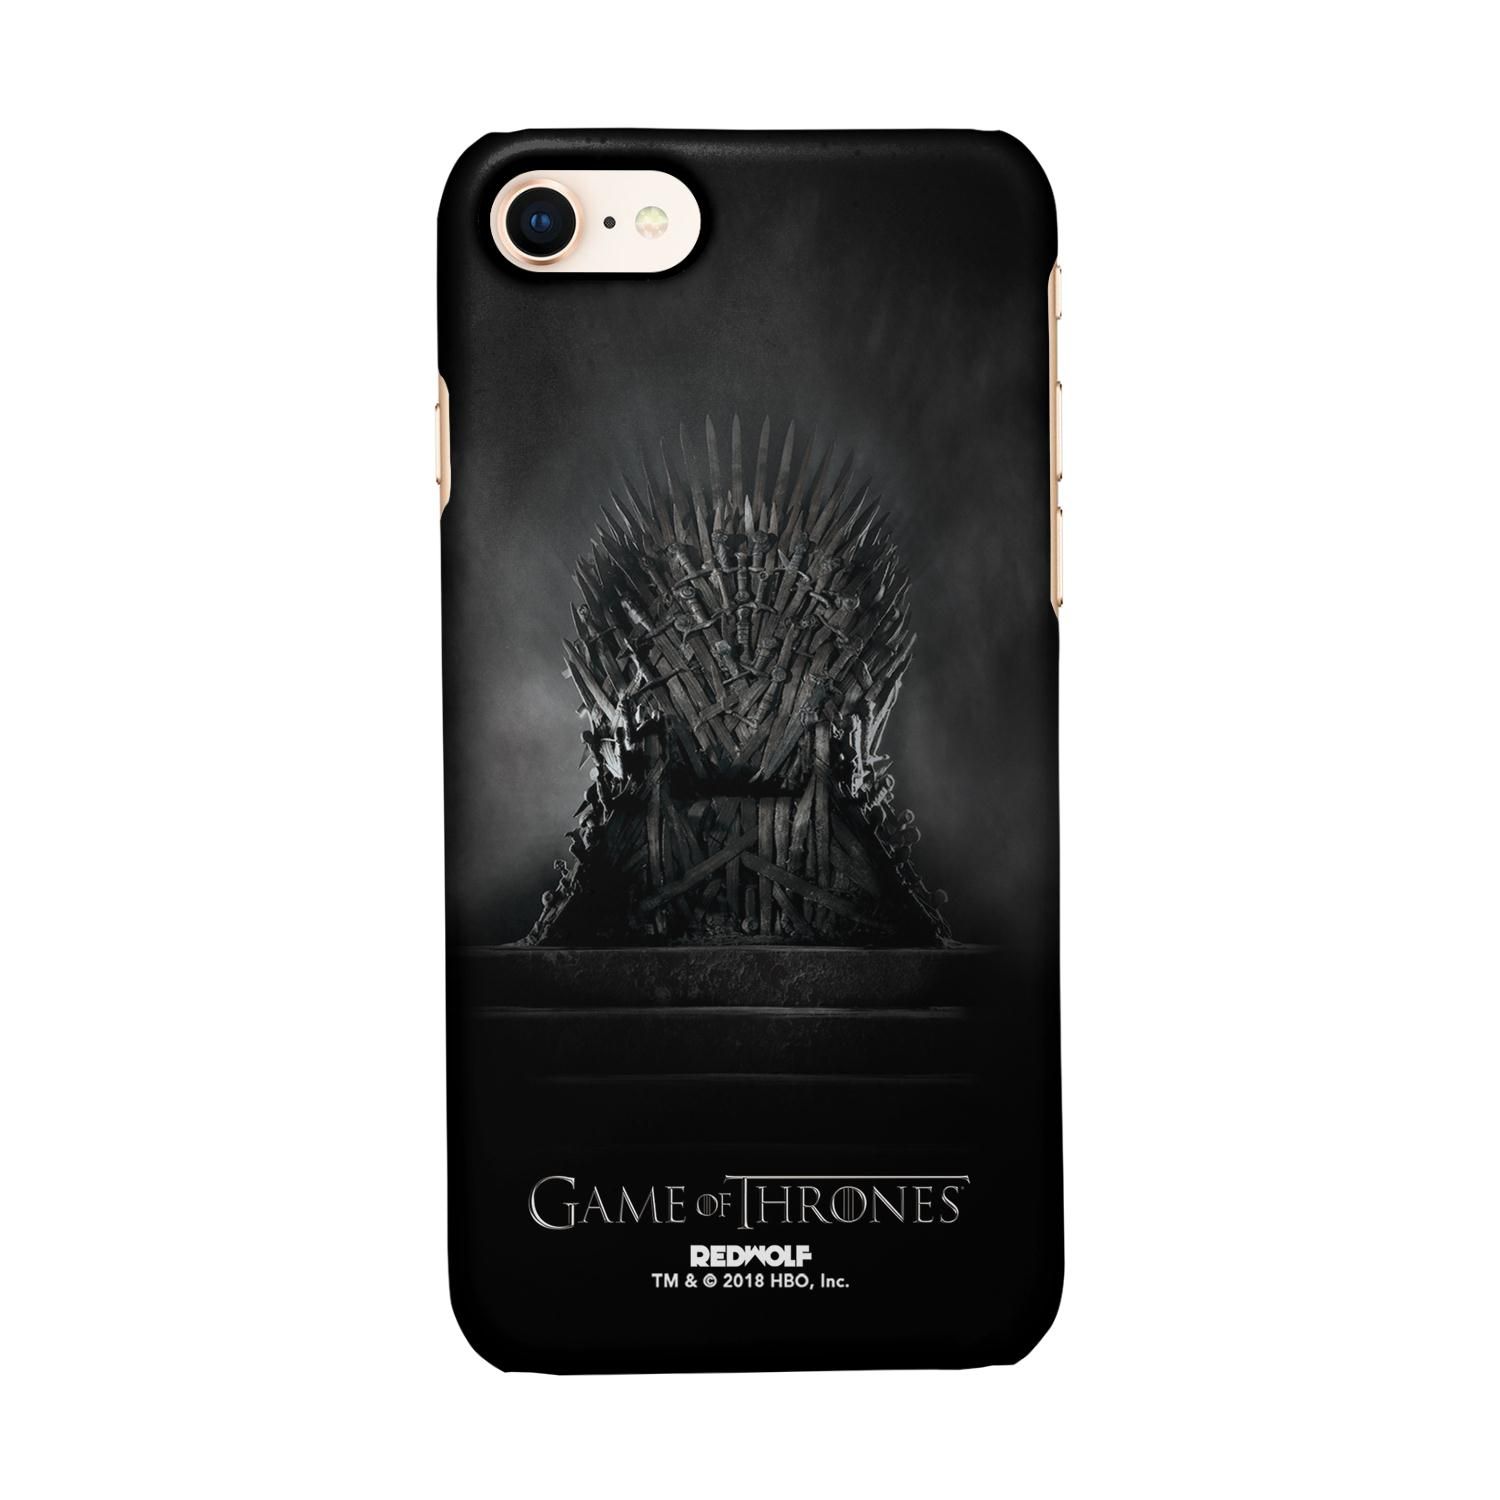 Buy The Throne - Sleek Phone Case for iPhone 8 Online